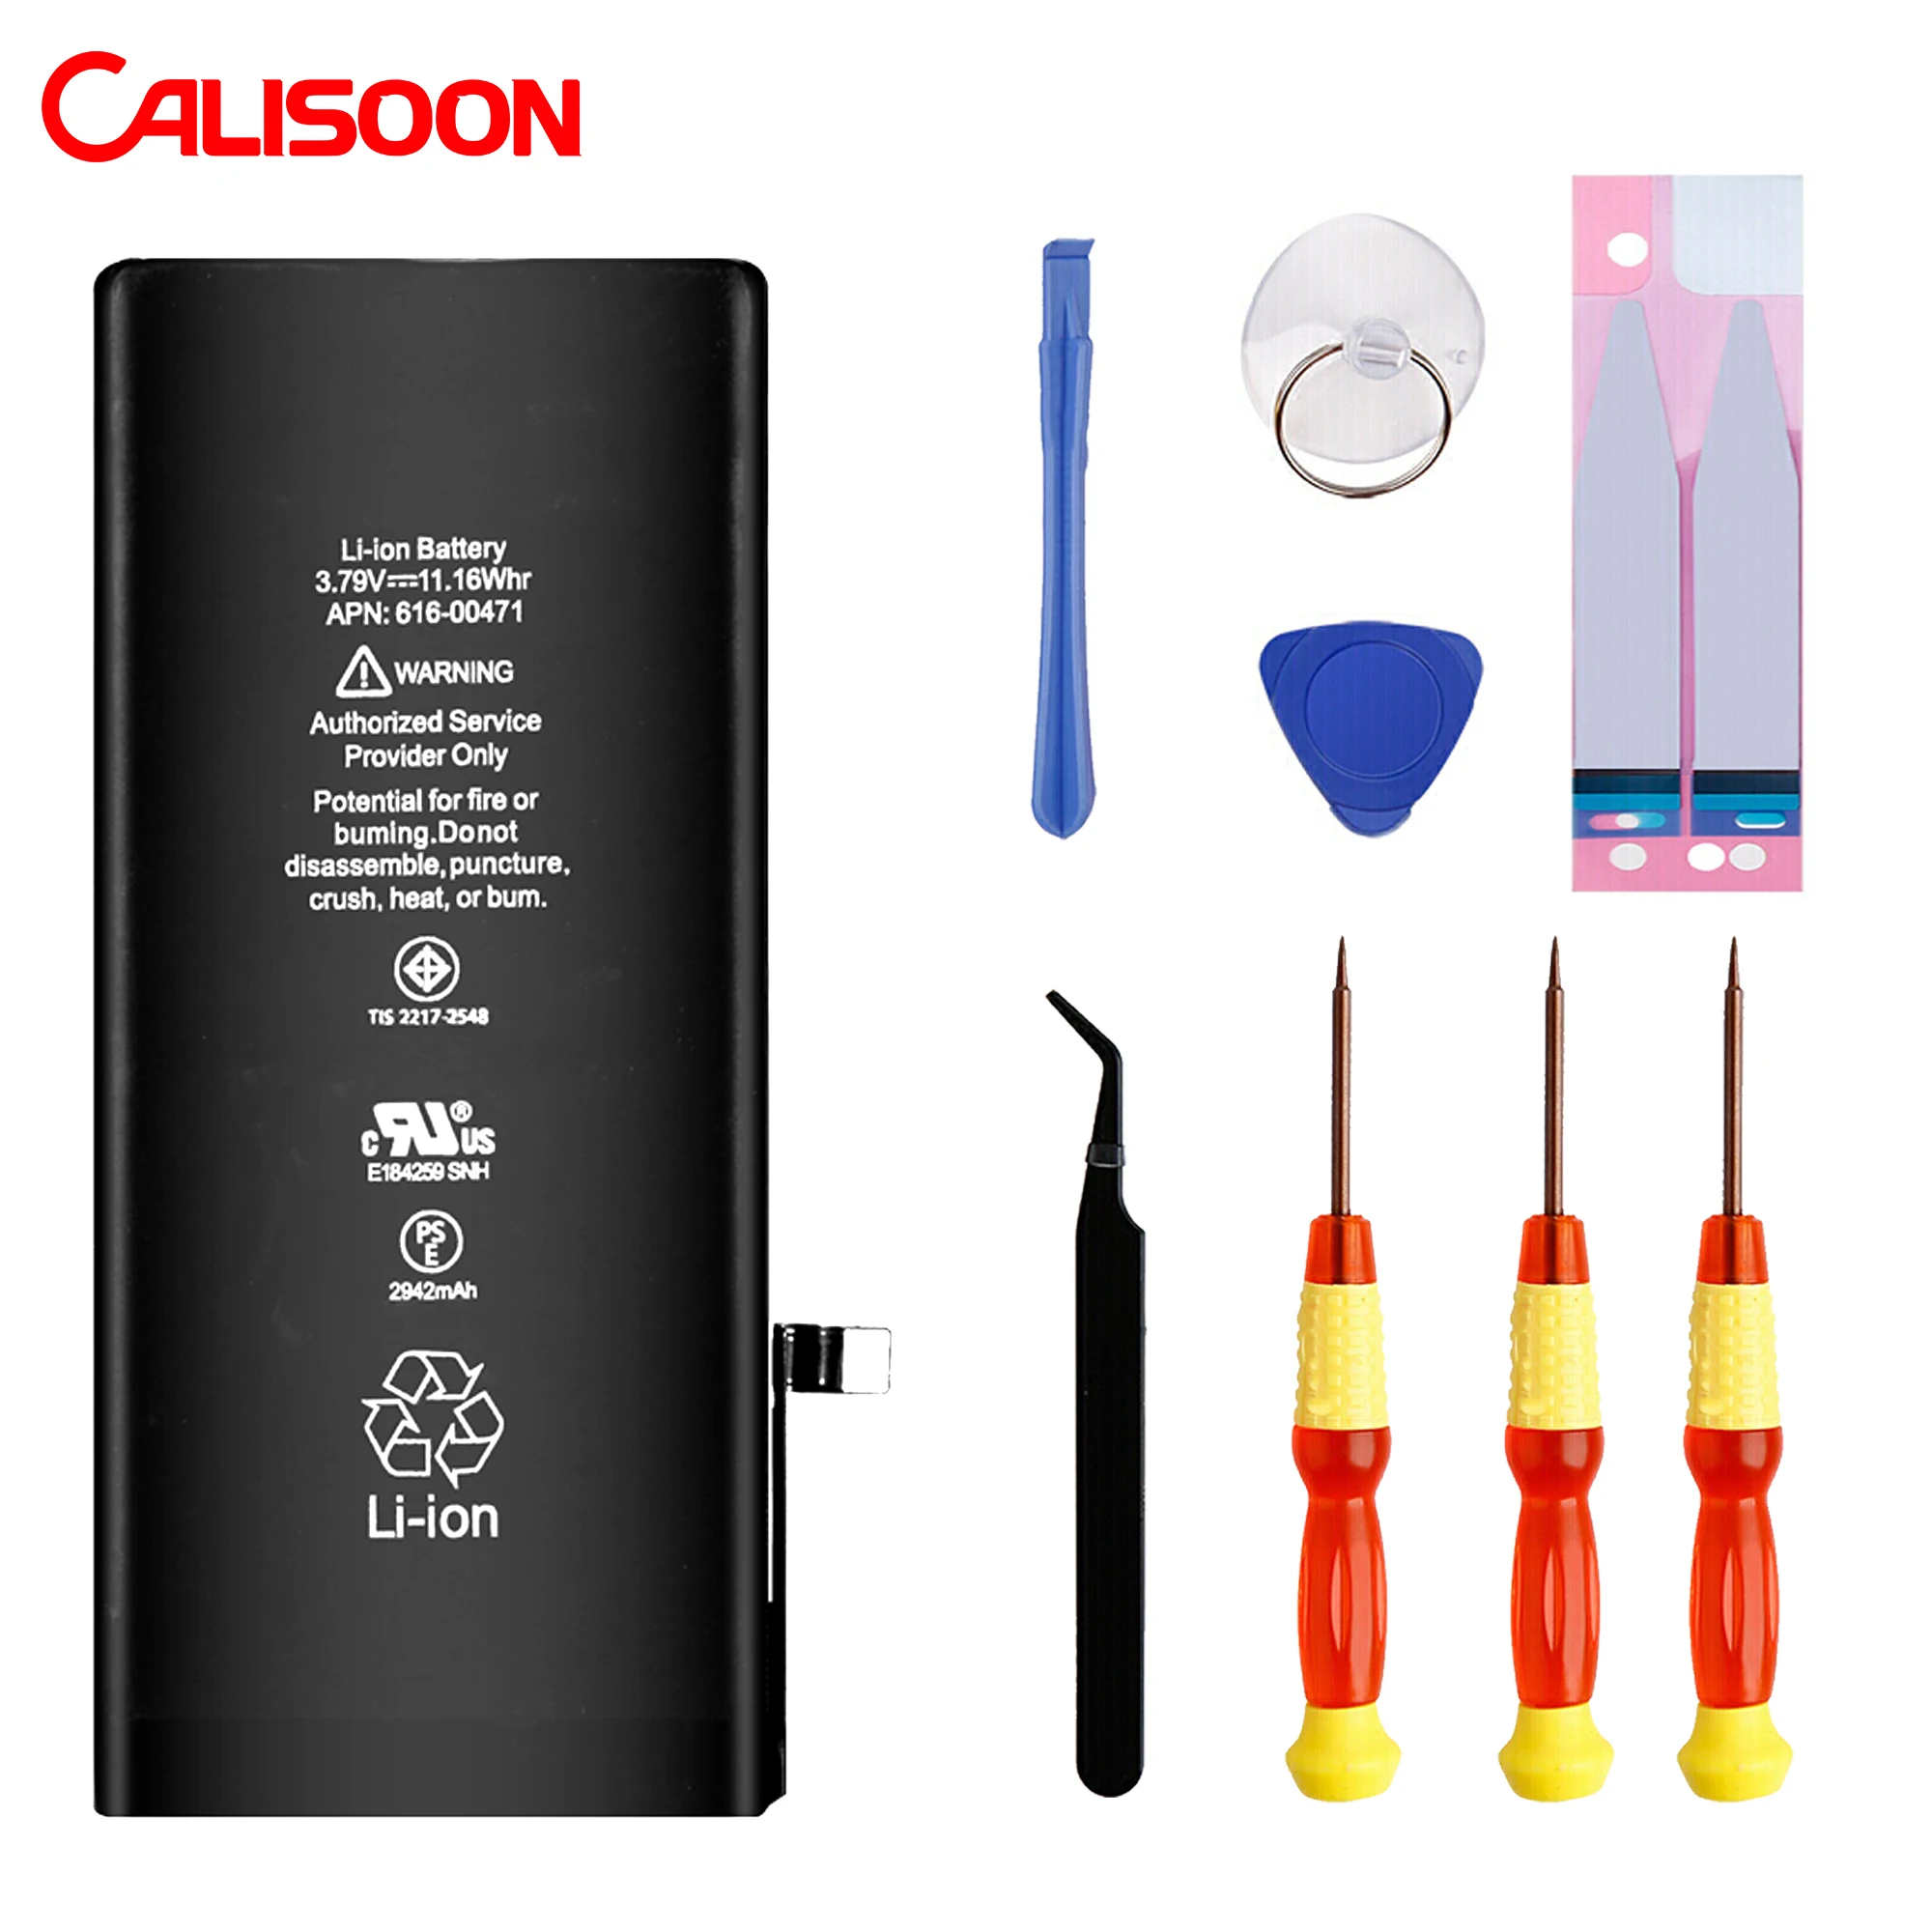 

Calisoon Original 1:1 Mobile Phone Battery For IPhone 6 6s 7 8 plus x xr xs 11 12 pro max 5 5c 5s se Rechargeable Polymer, Black